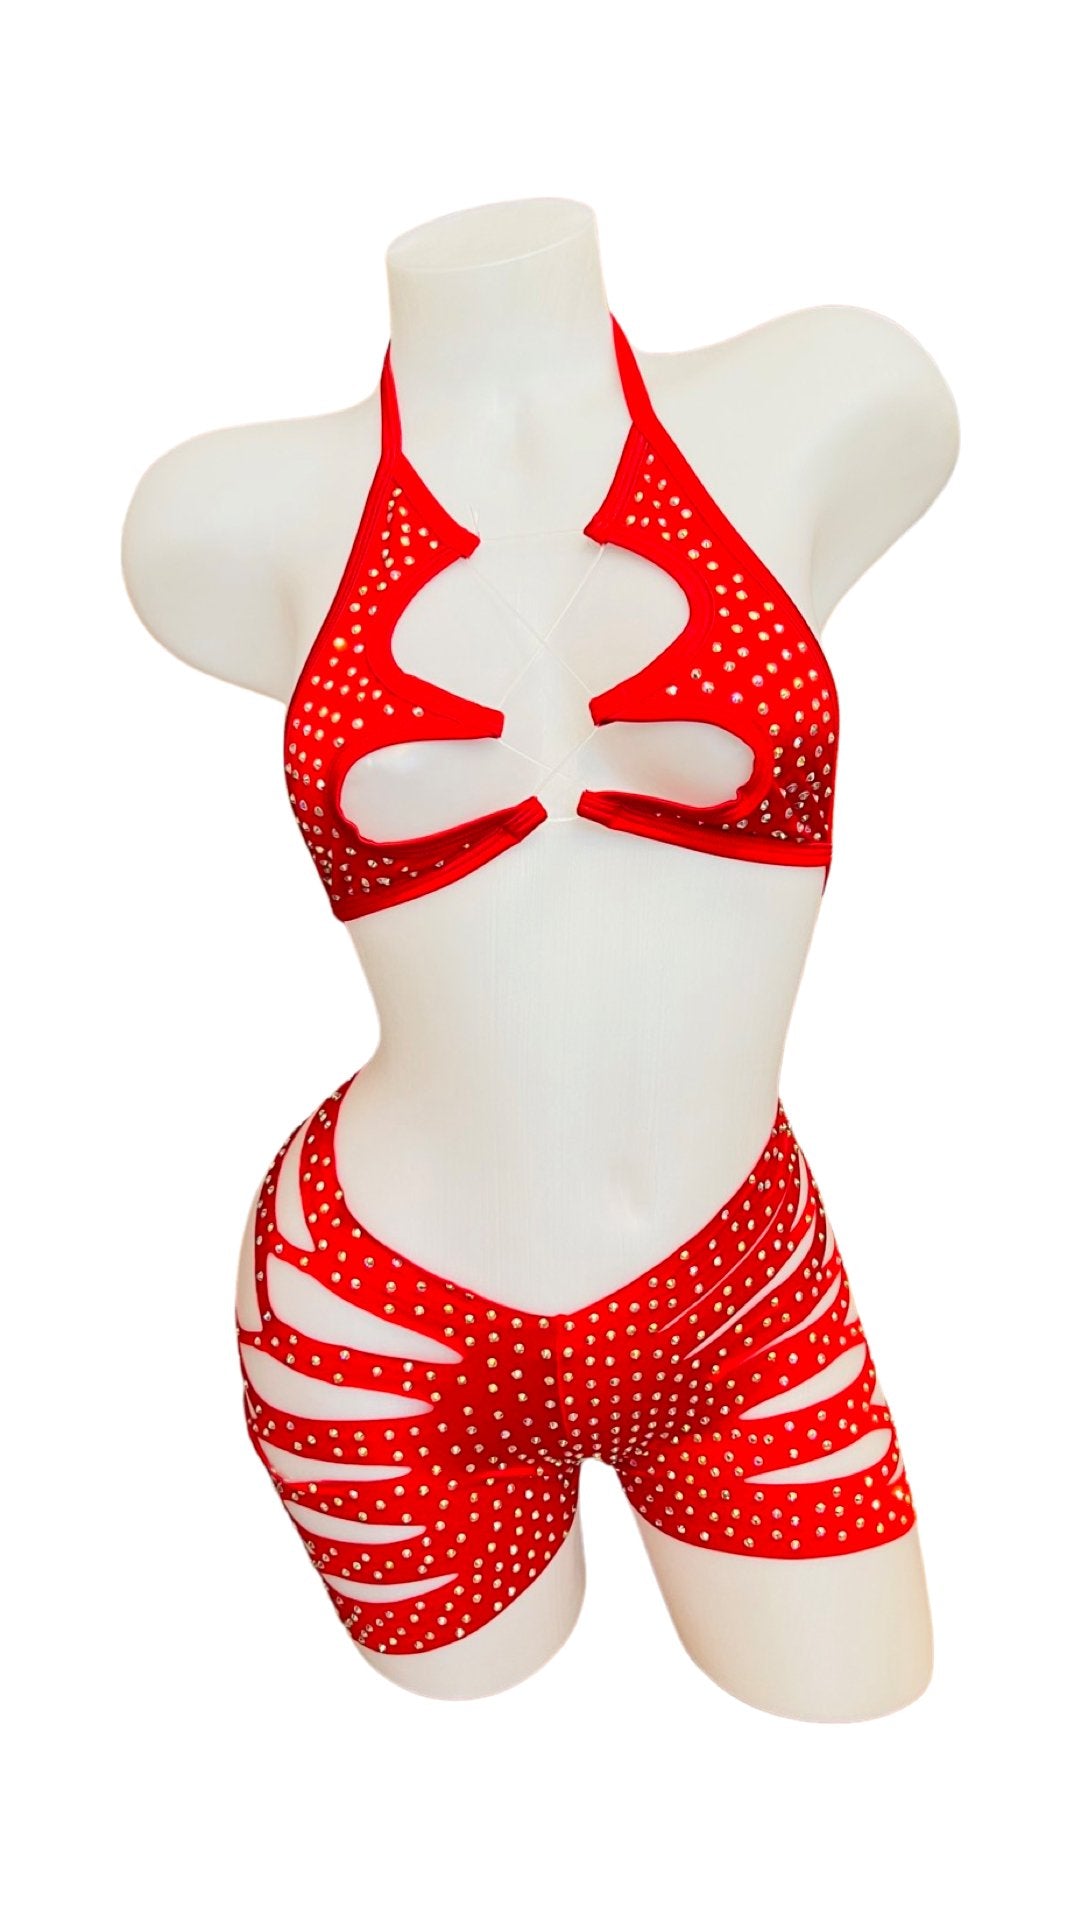 Rhinestone Halter Top and Cut Out Short Set Red - Model Express VancouverBikini